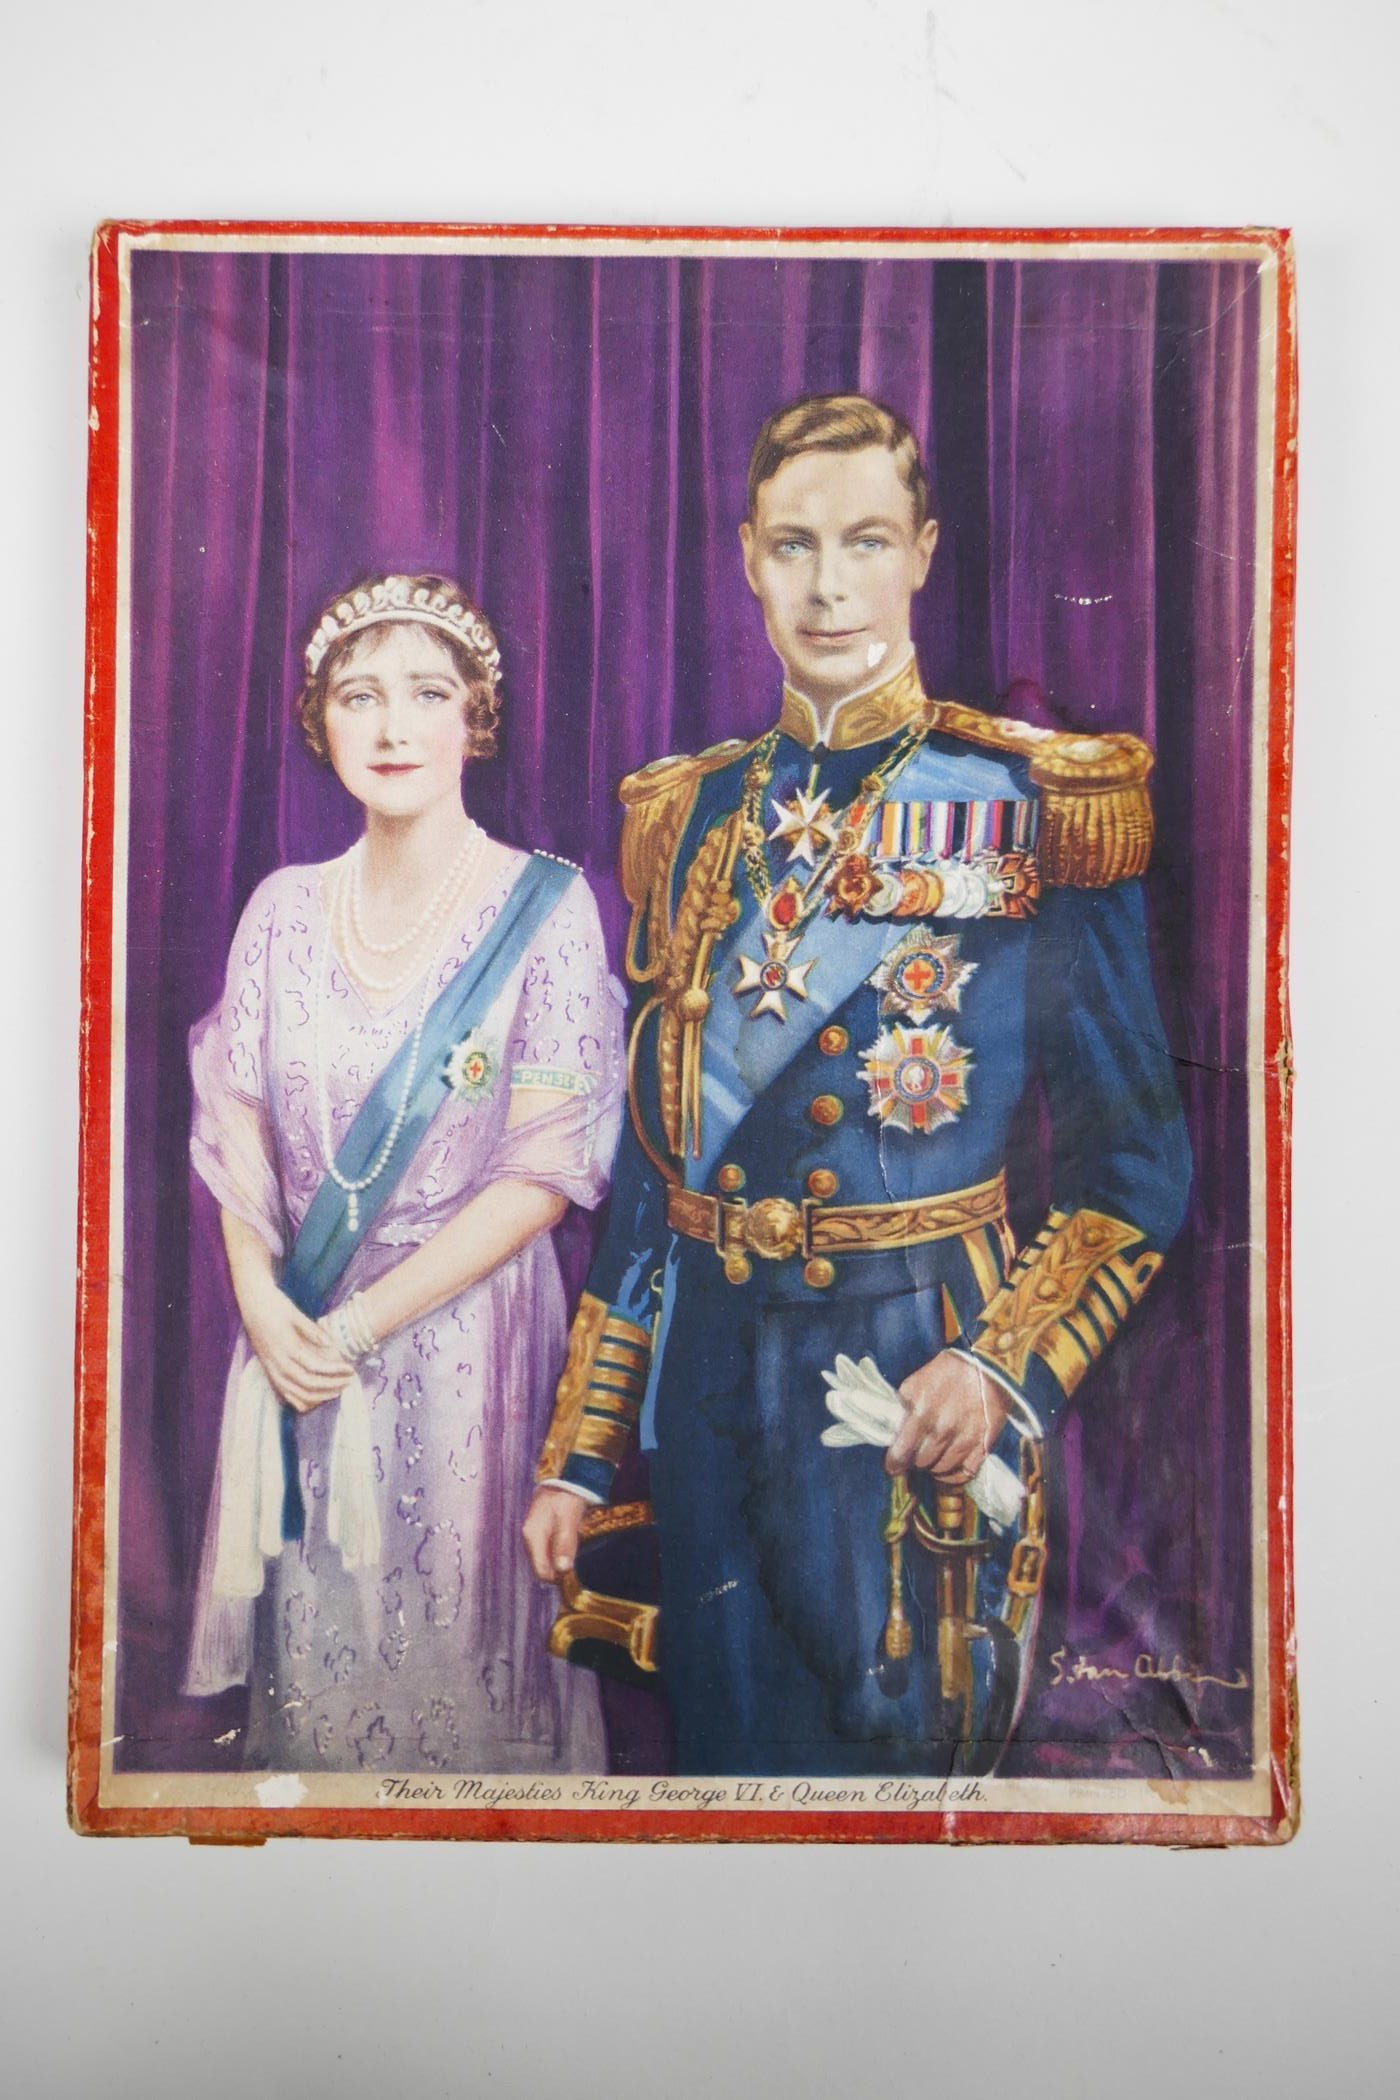 Various boxed and unboxed commemorative 1937 coronation jigsaw puzzles, mostly complete - Image 4 of 4